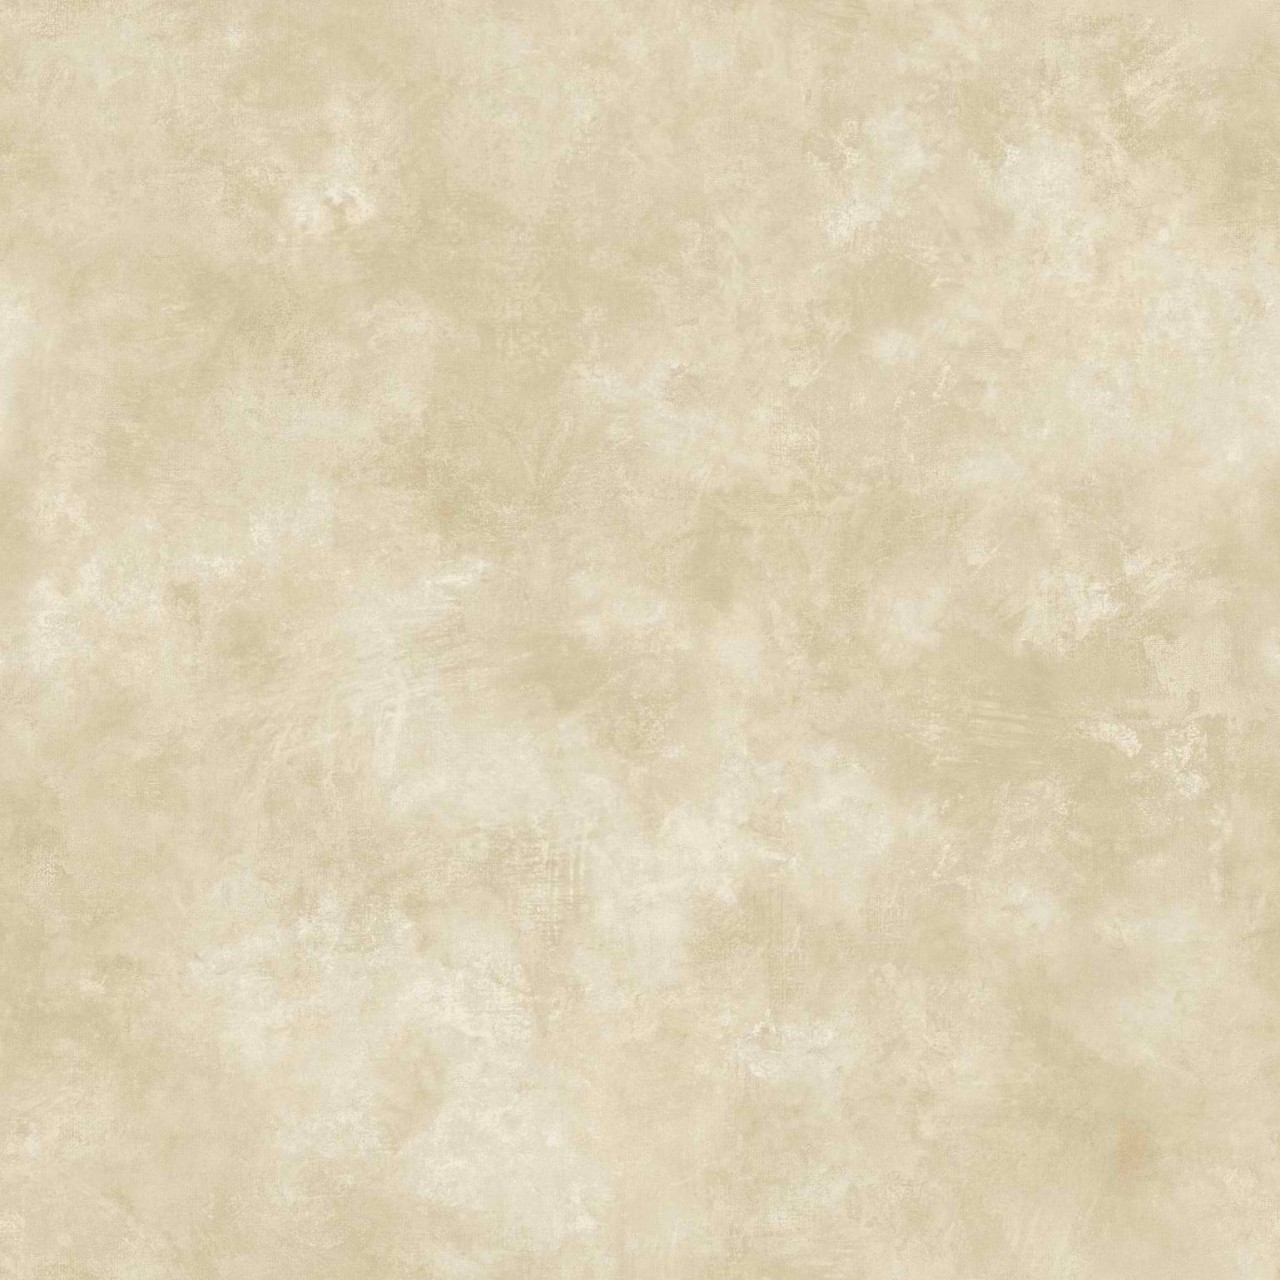 Tan background texture - for design and art project